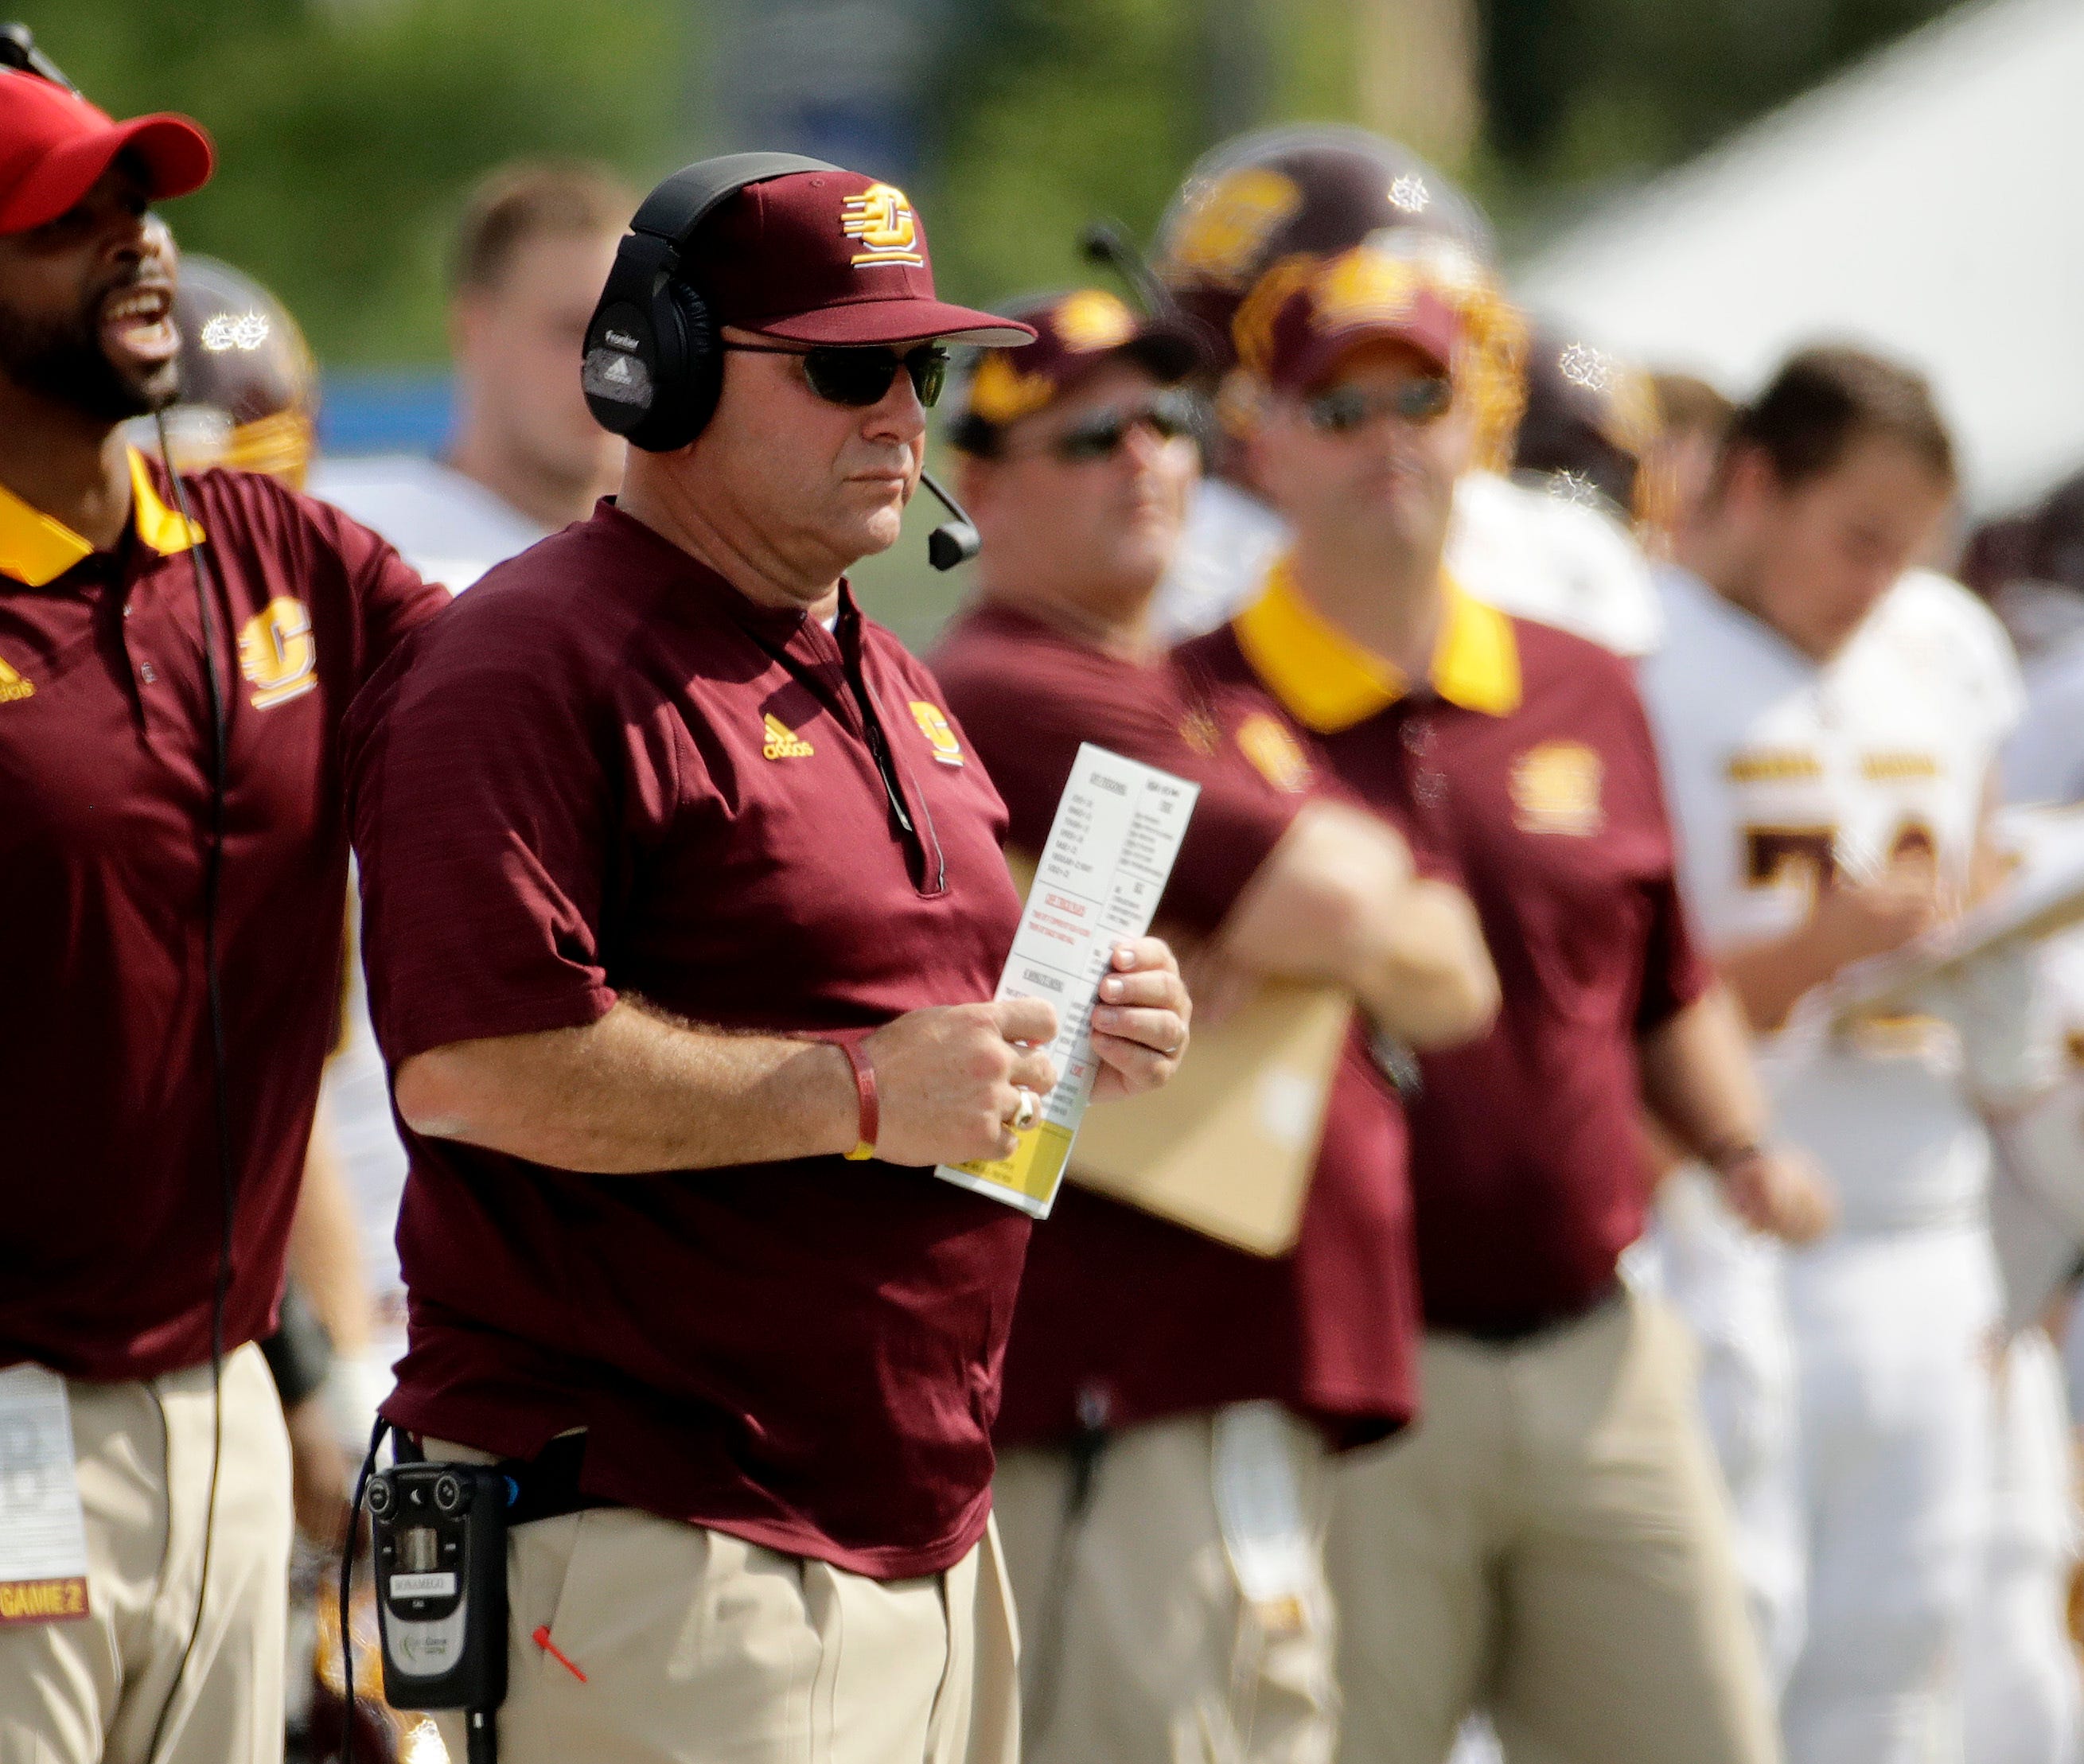 Who's next at Central Michigan after firing of coach John Bonamego?